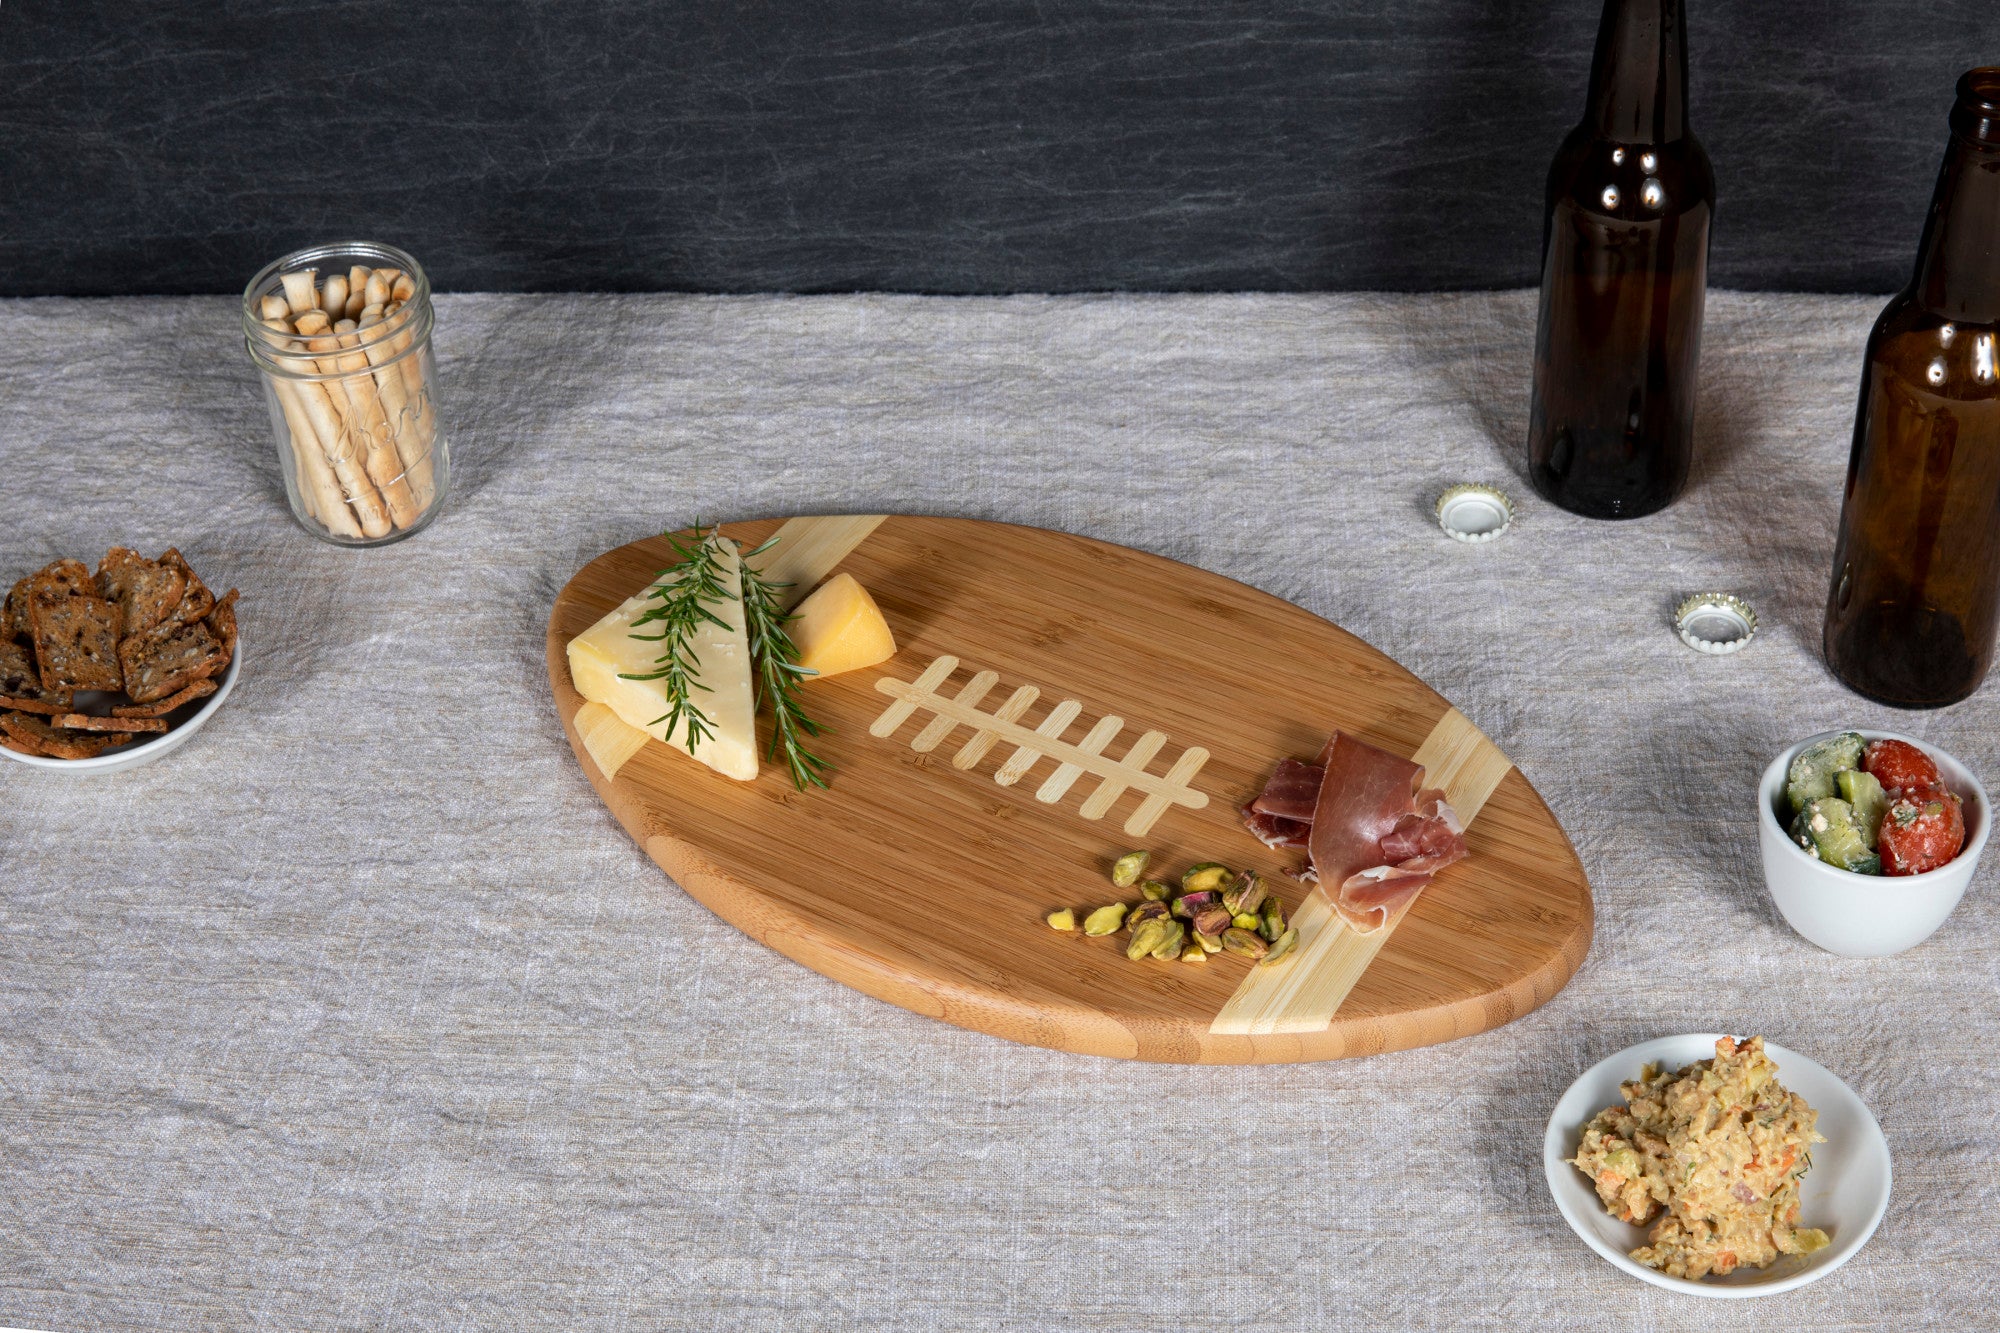 NC State Wolfpack - Touchdown! Football Cutting Board & Serving Tray